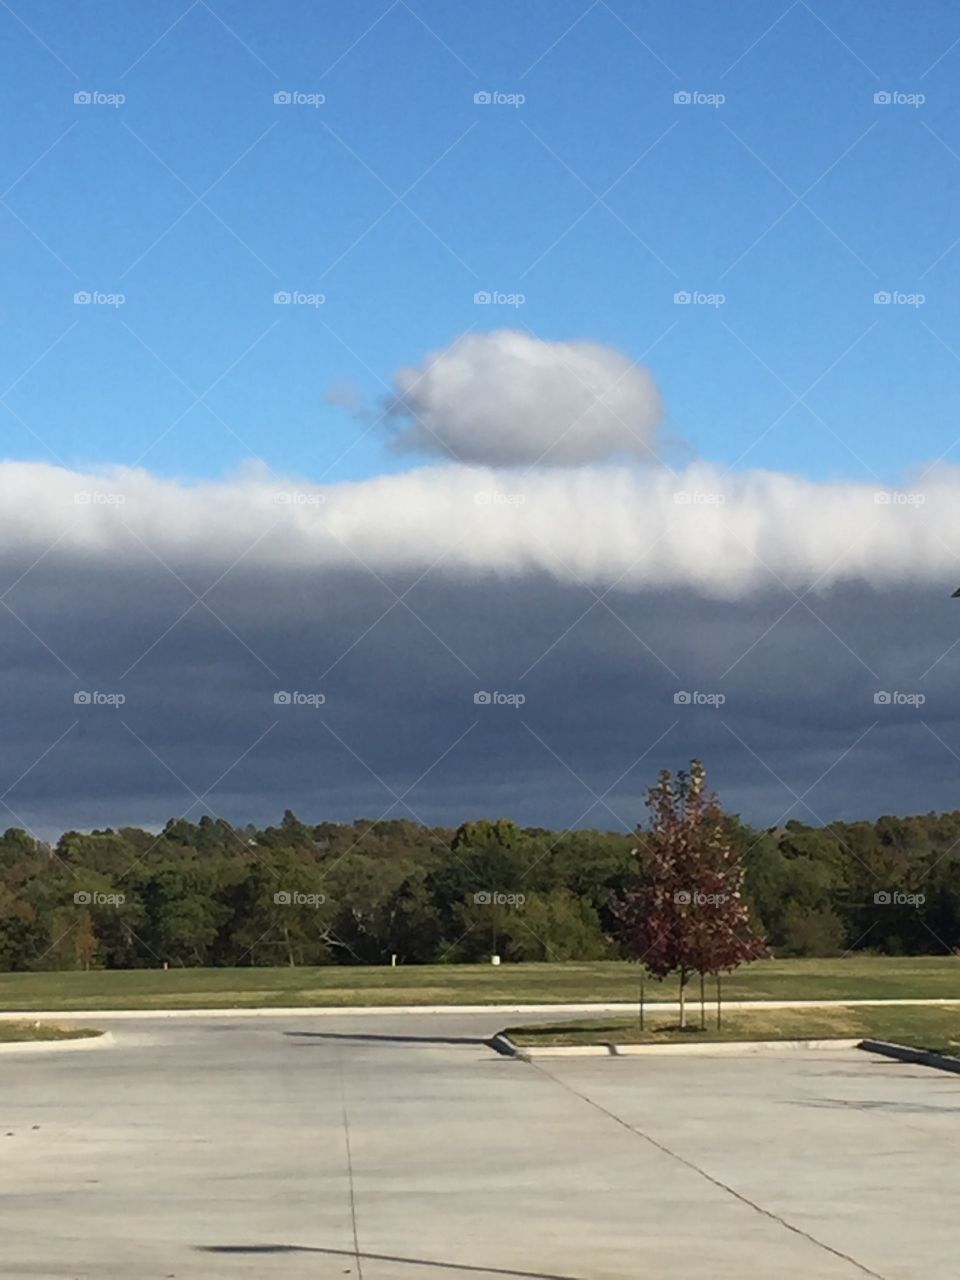 Choctaw land. Interesting cloud formation on Choctaw land in McAlester Oklahoma.
